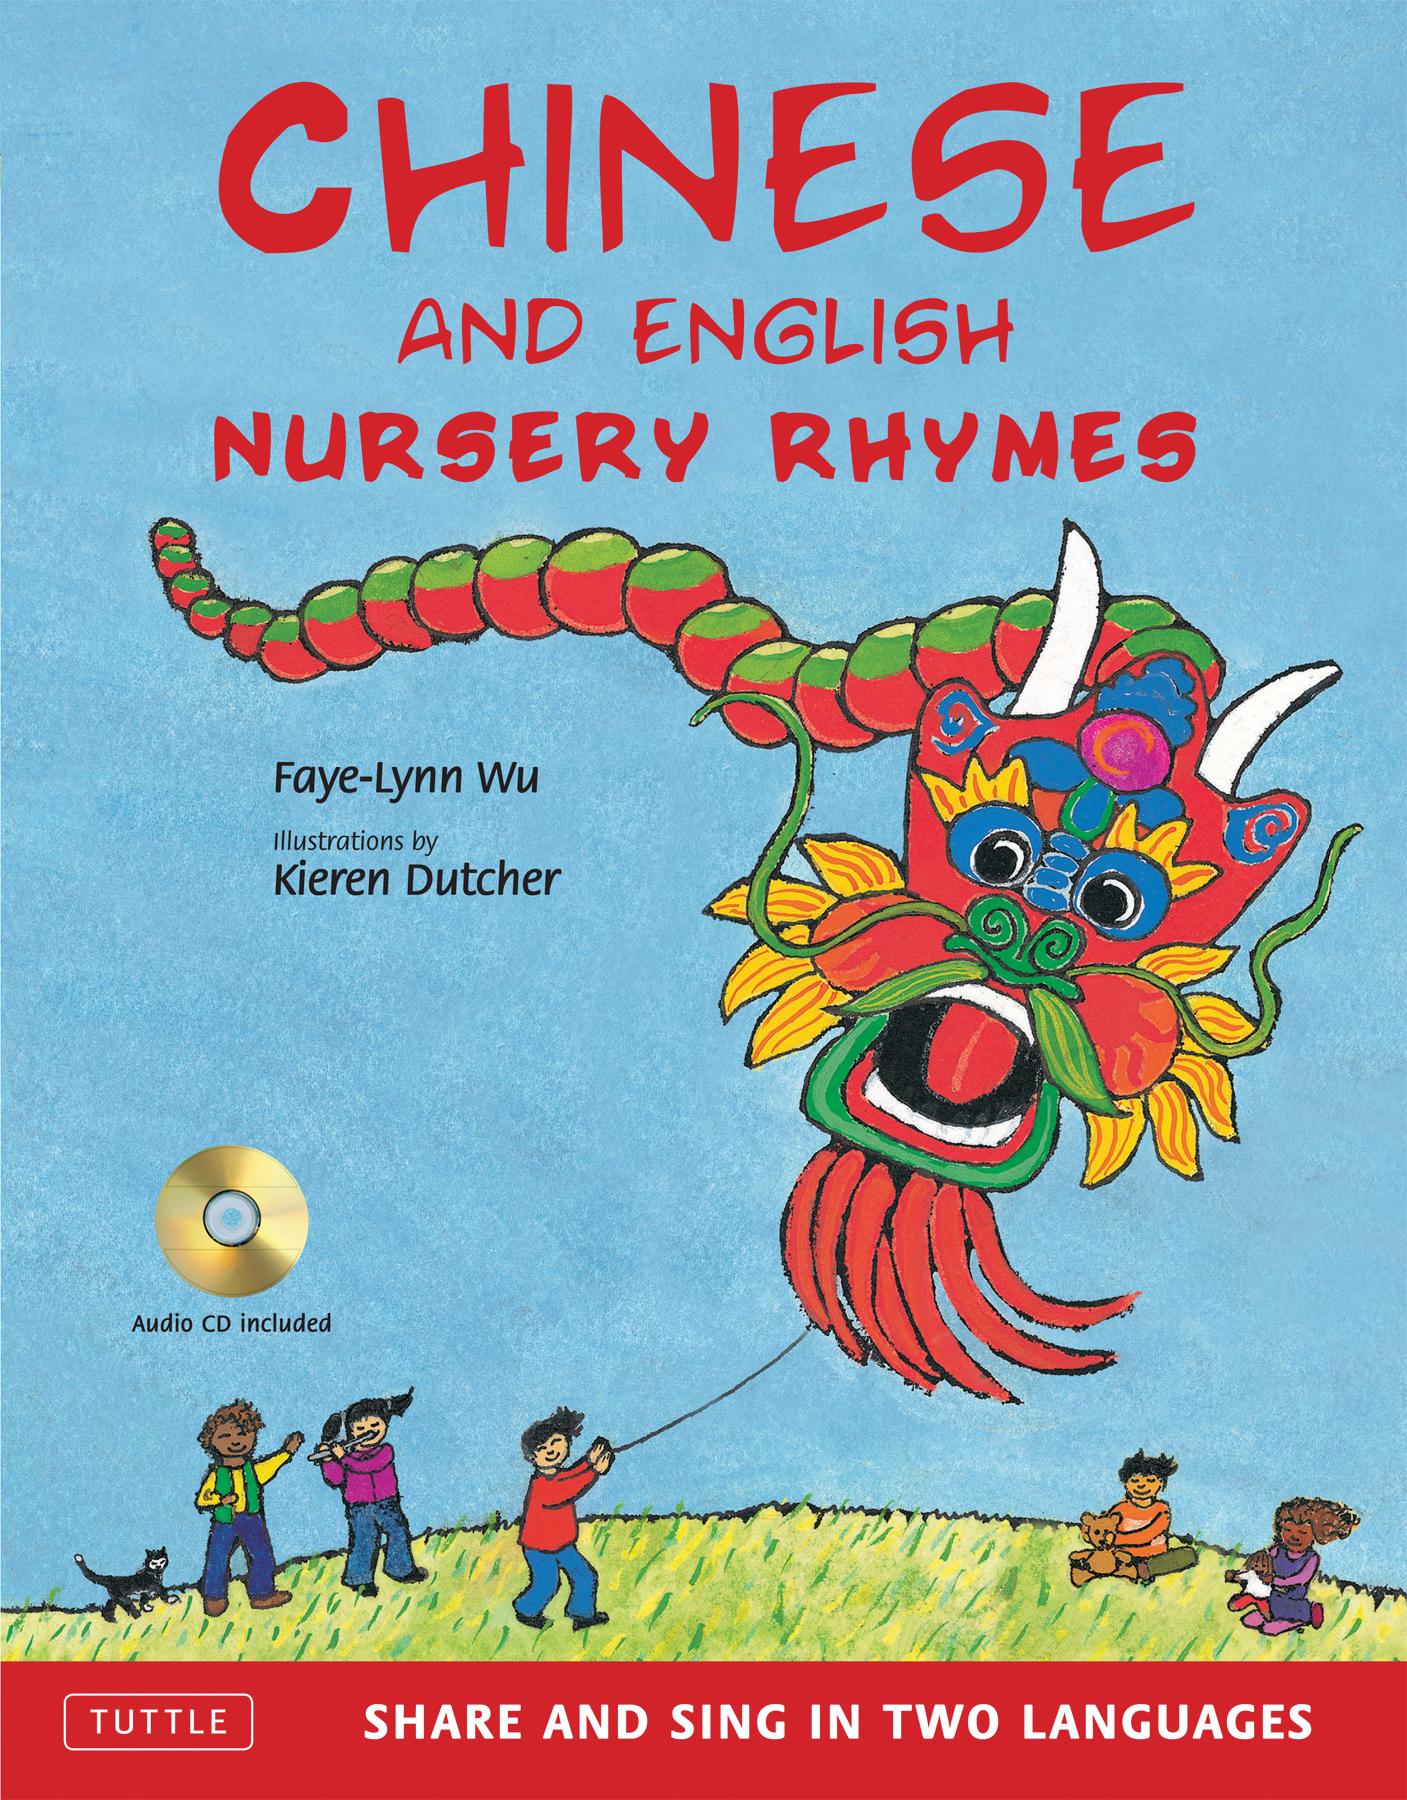 Chinese and English Nursery Rhymes : Share and Sing in Two Languages [Audio CD Included] - image 1 of 1